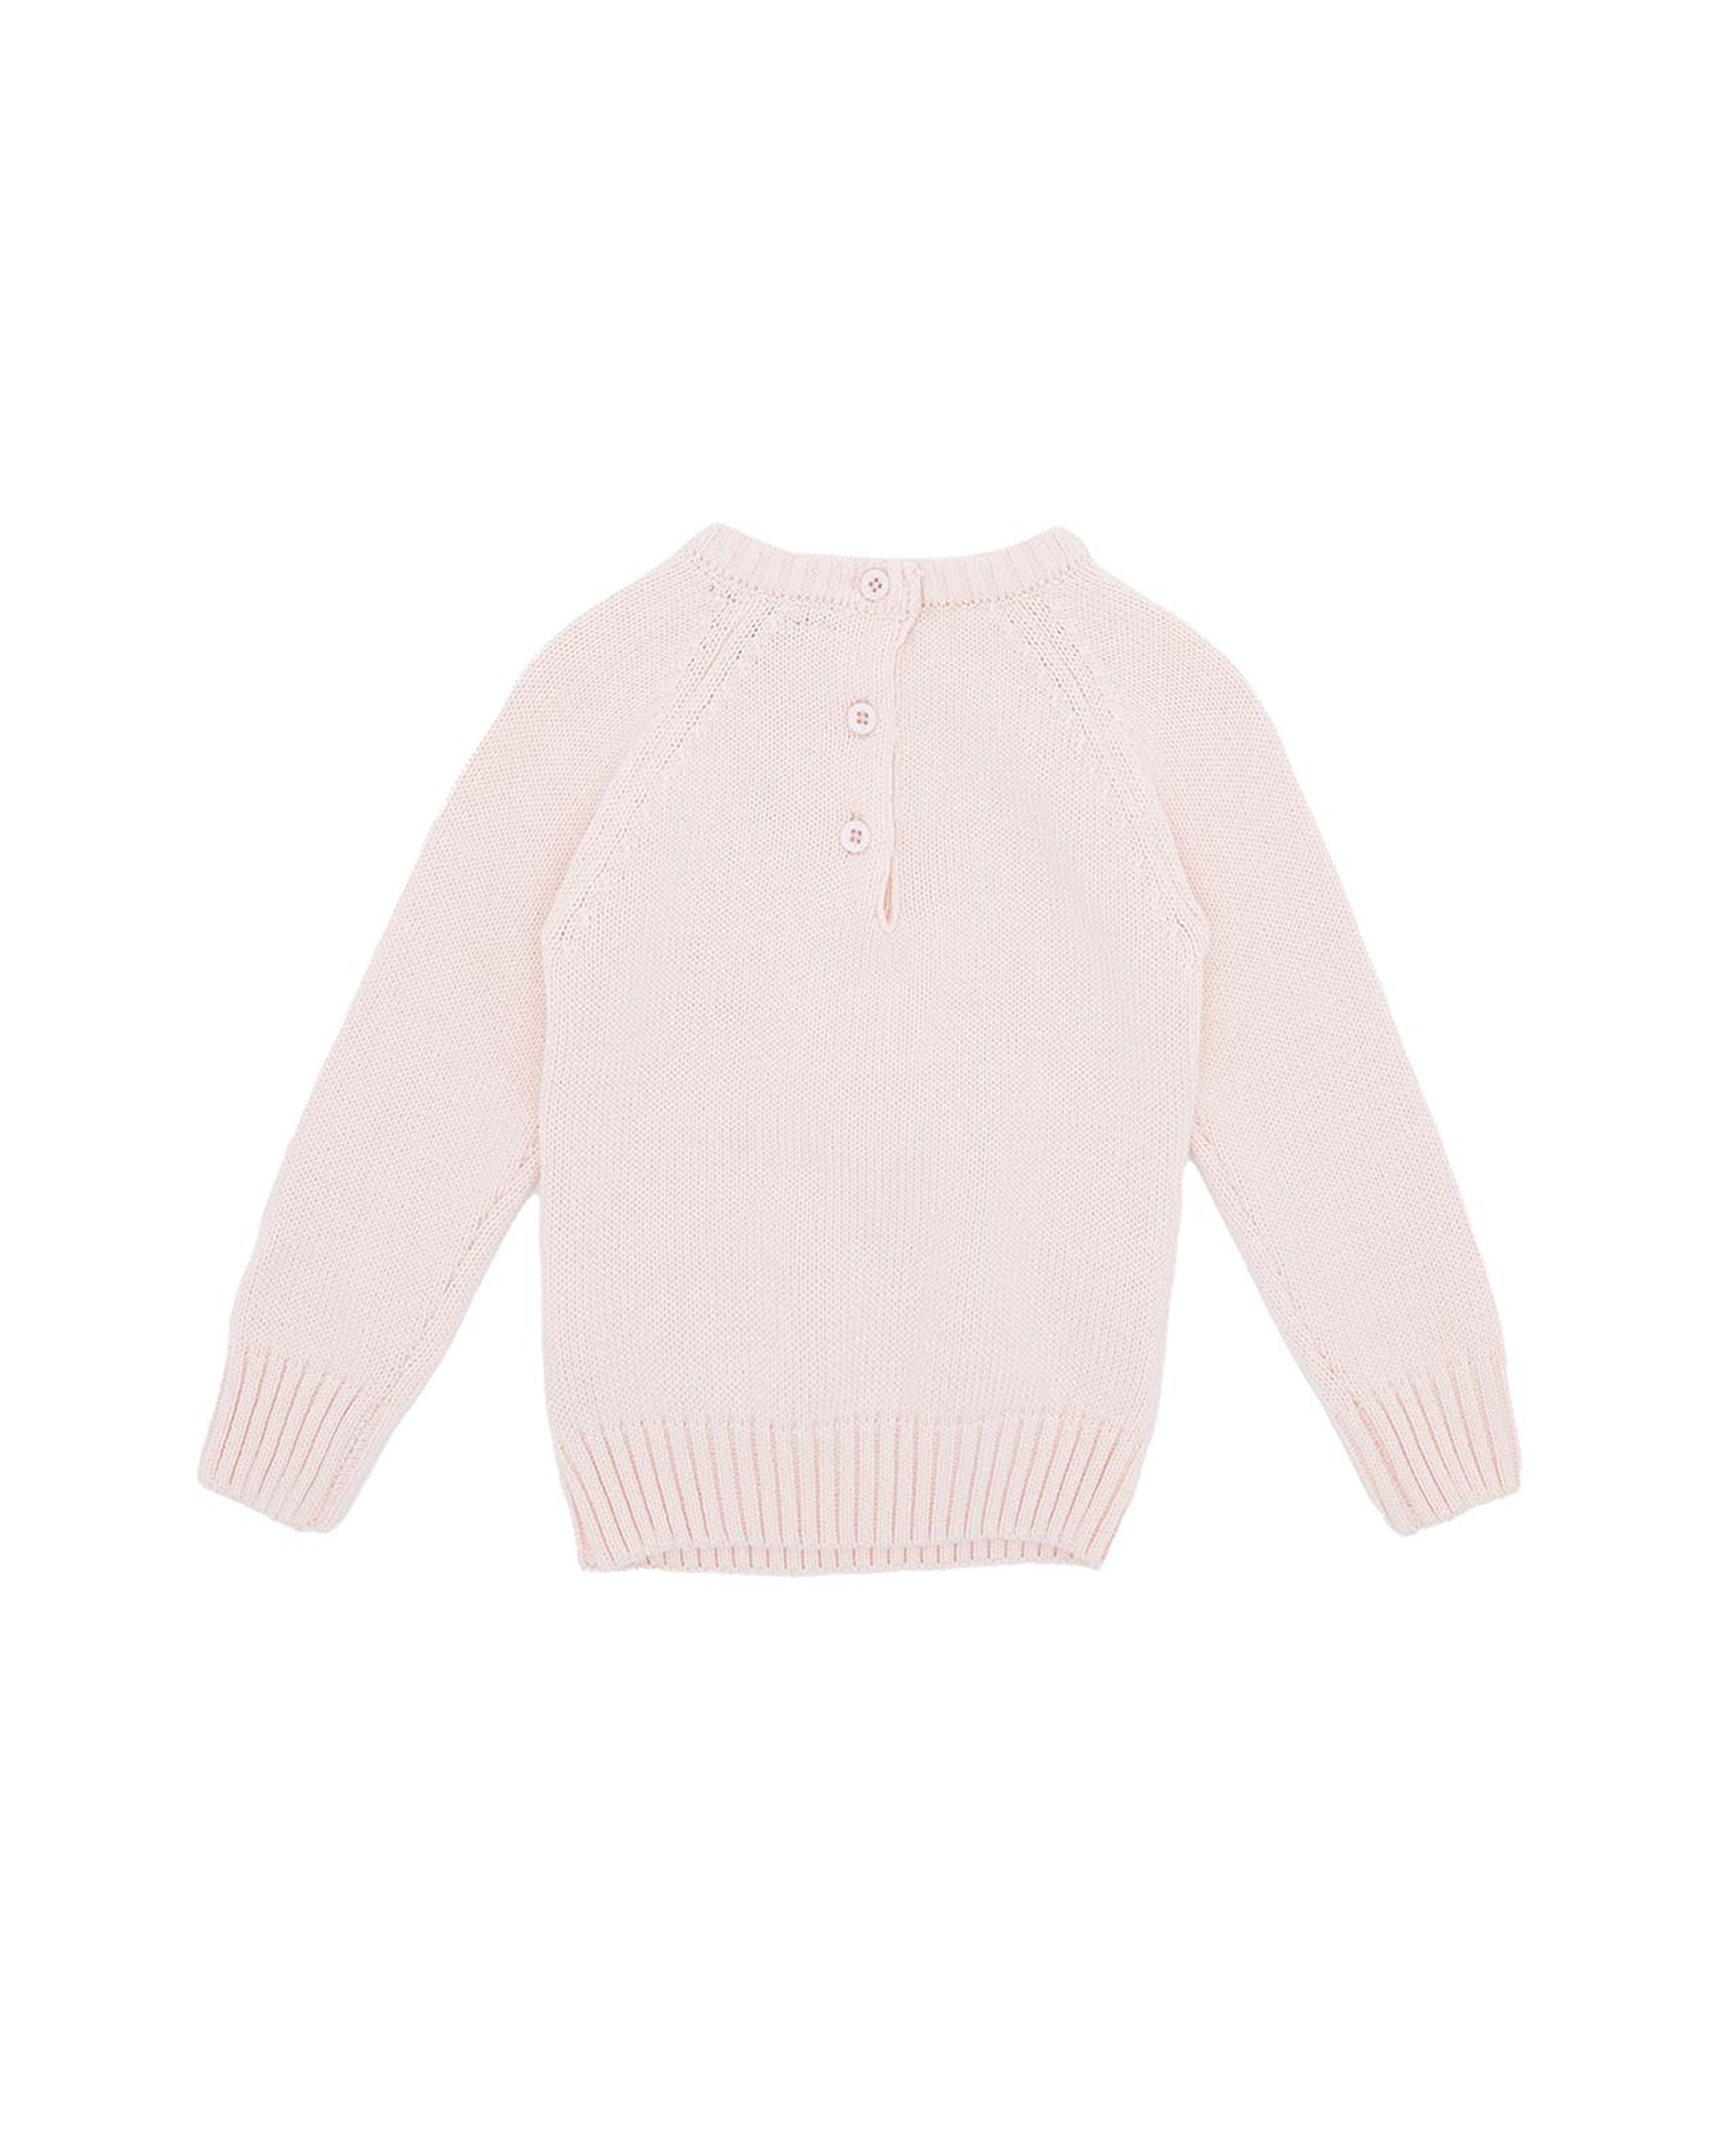 Embroidered Sweater with Crew Neck and Long Sleeves